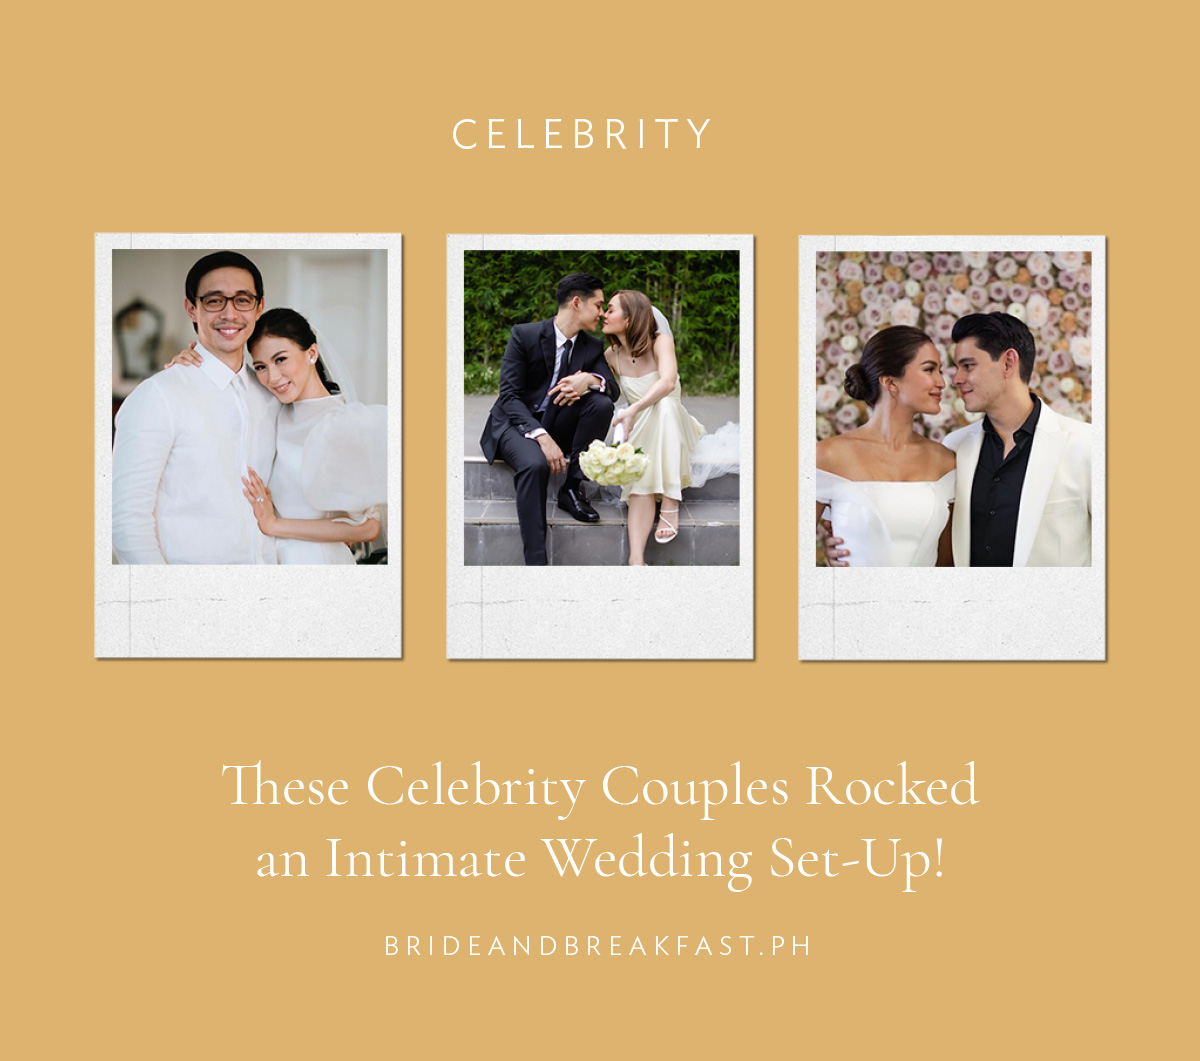 These Celebrity Couples Rocked an Intimate Wedding Set-Up!